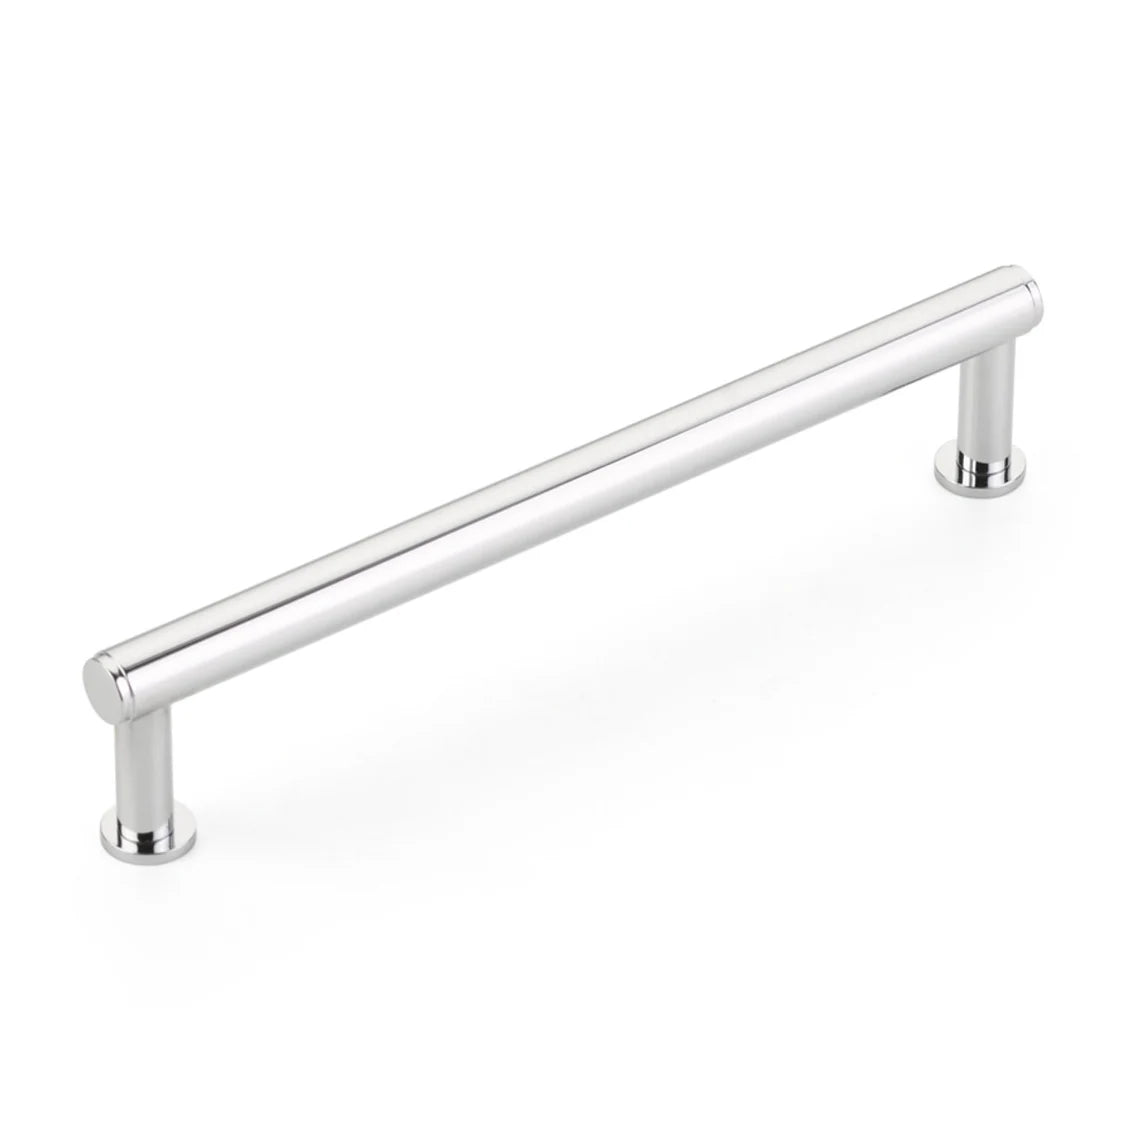 Polished Chrome "Maison No. 2" Smooth Drawer Pulls and Cabinet Knobs with Optional Backplate - Forge Hardware Studio